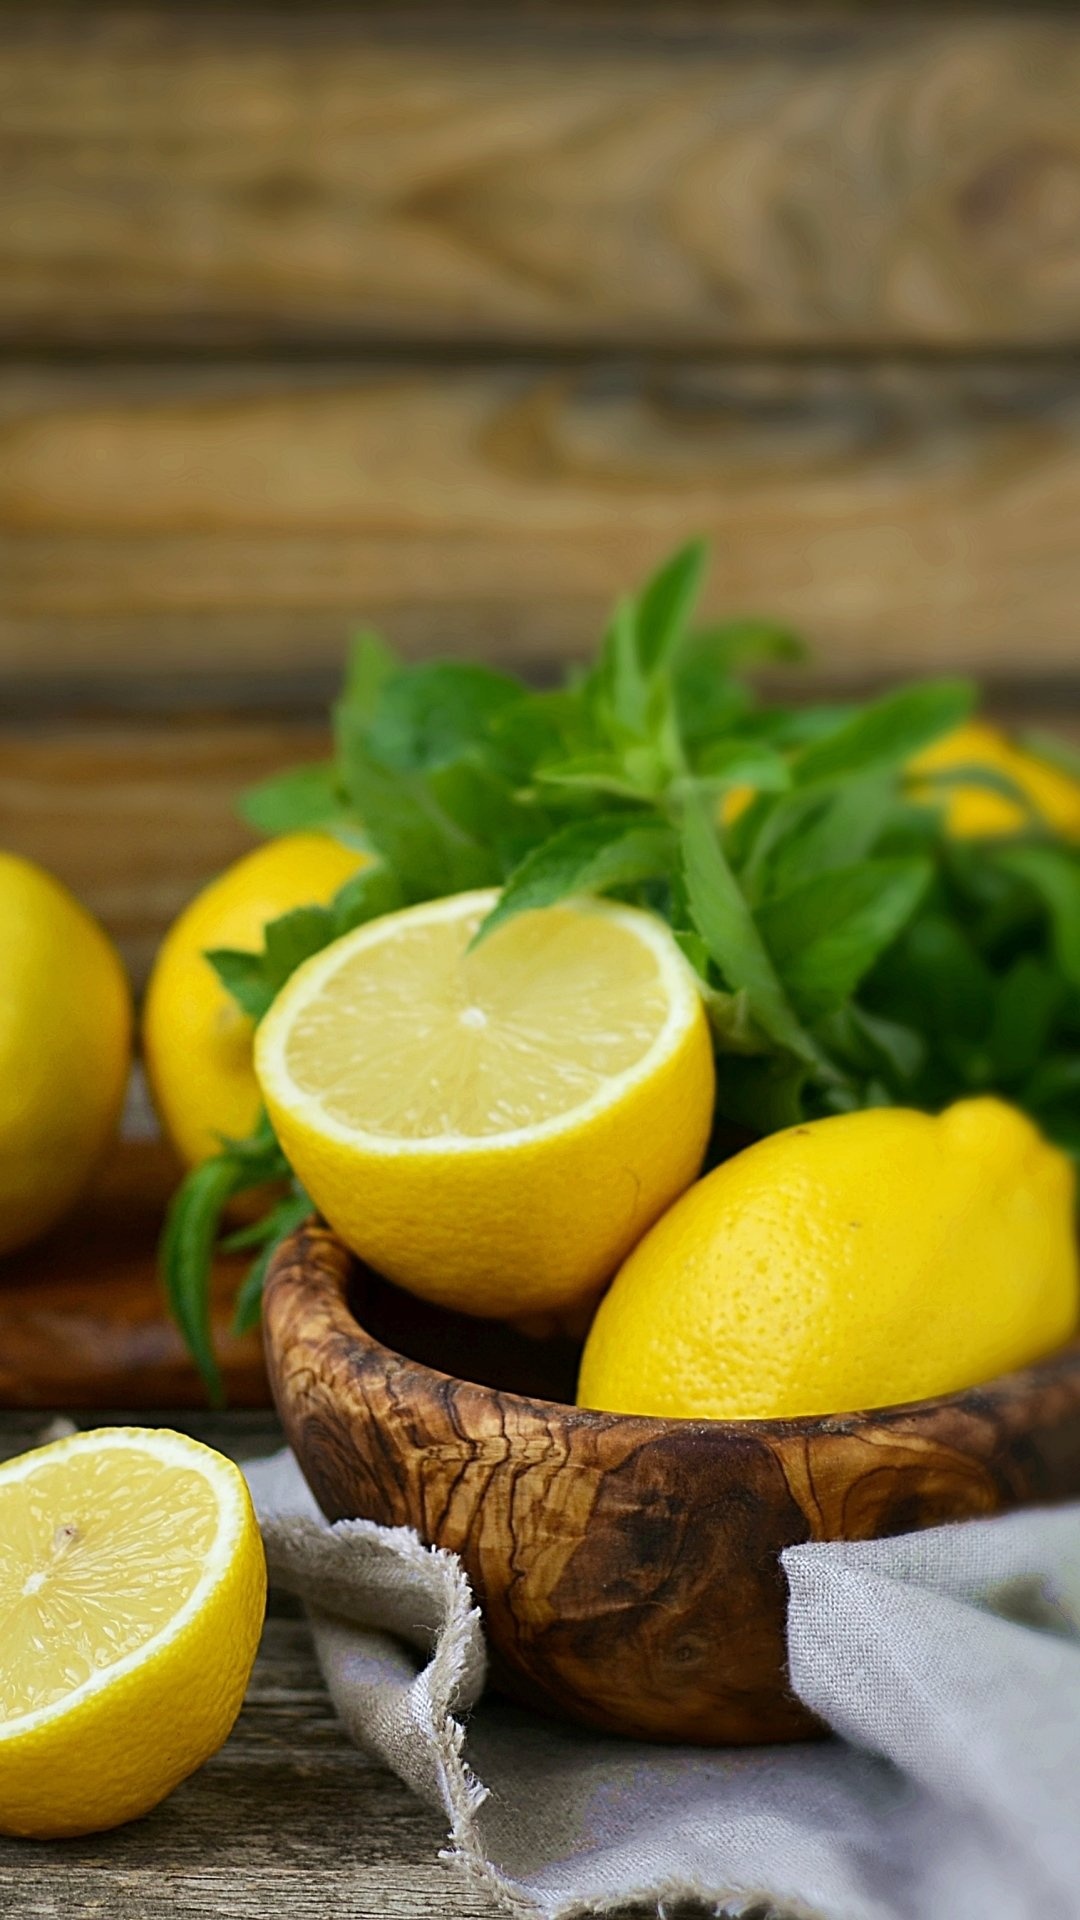 Lemon: A hybrid of the original citron and lime, A great source of vitamin C and fiber. 1080x1920 Full HD Background.